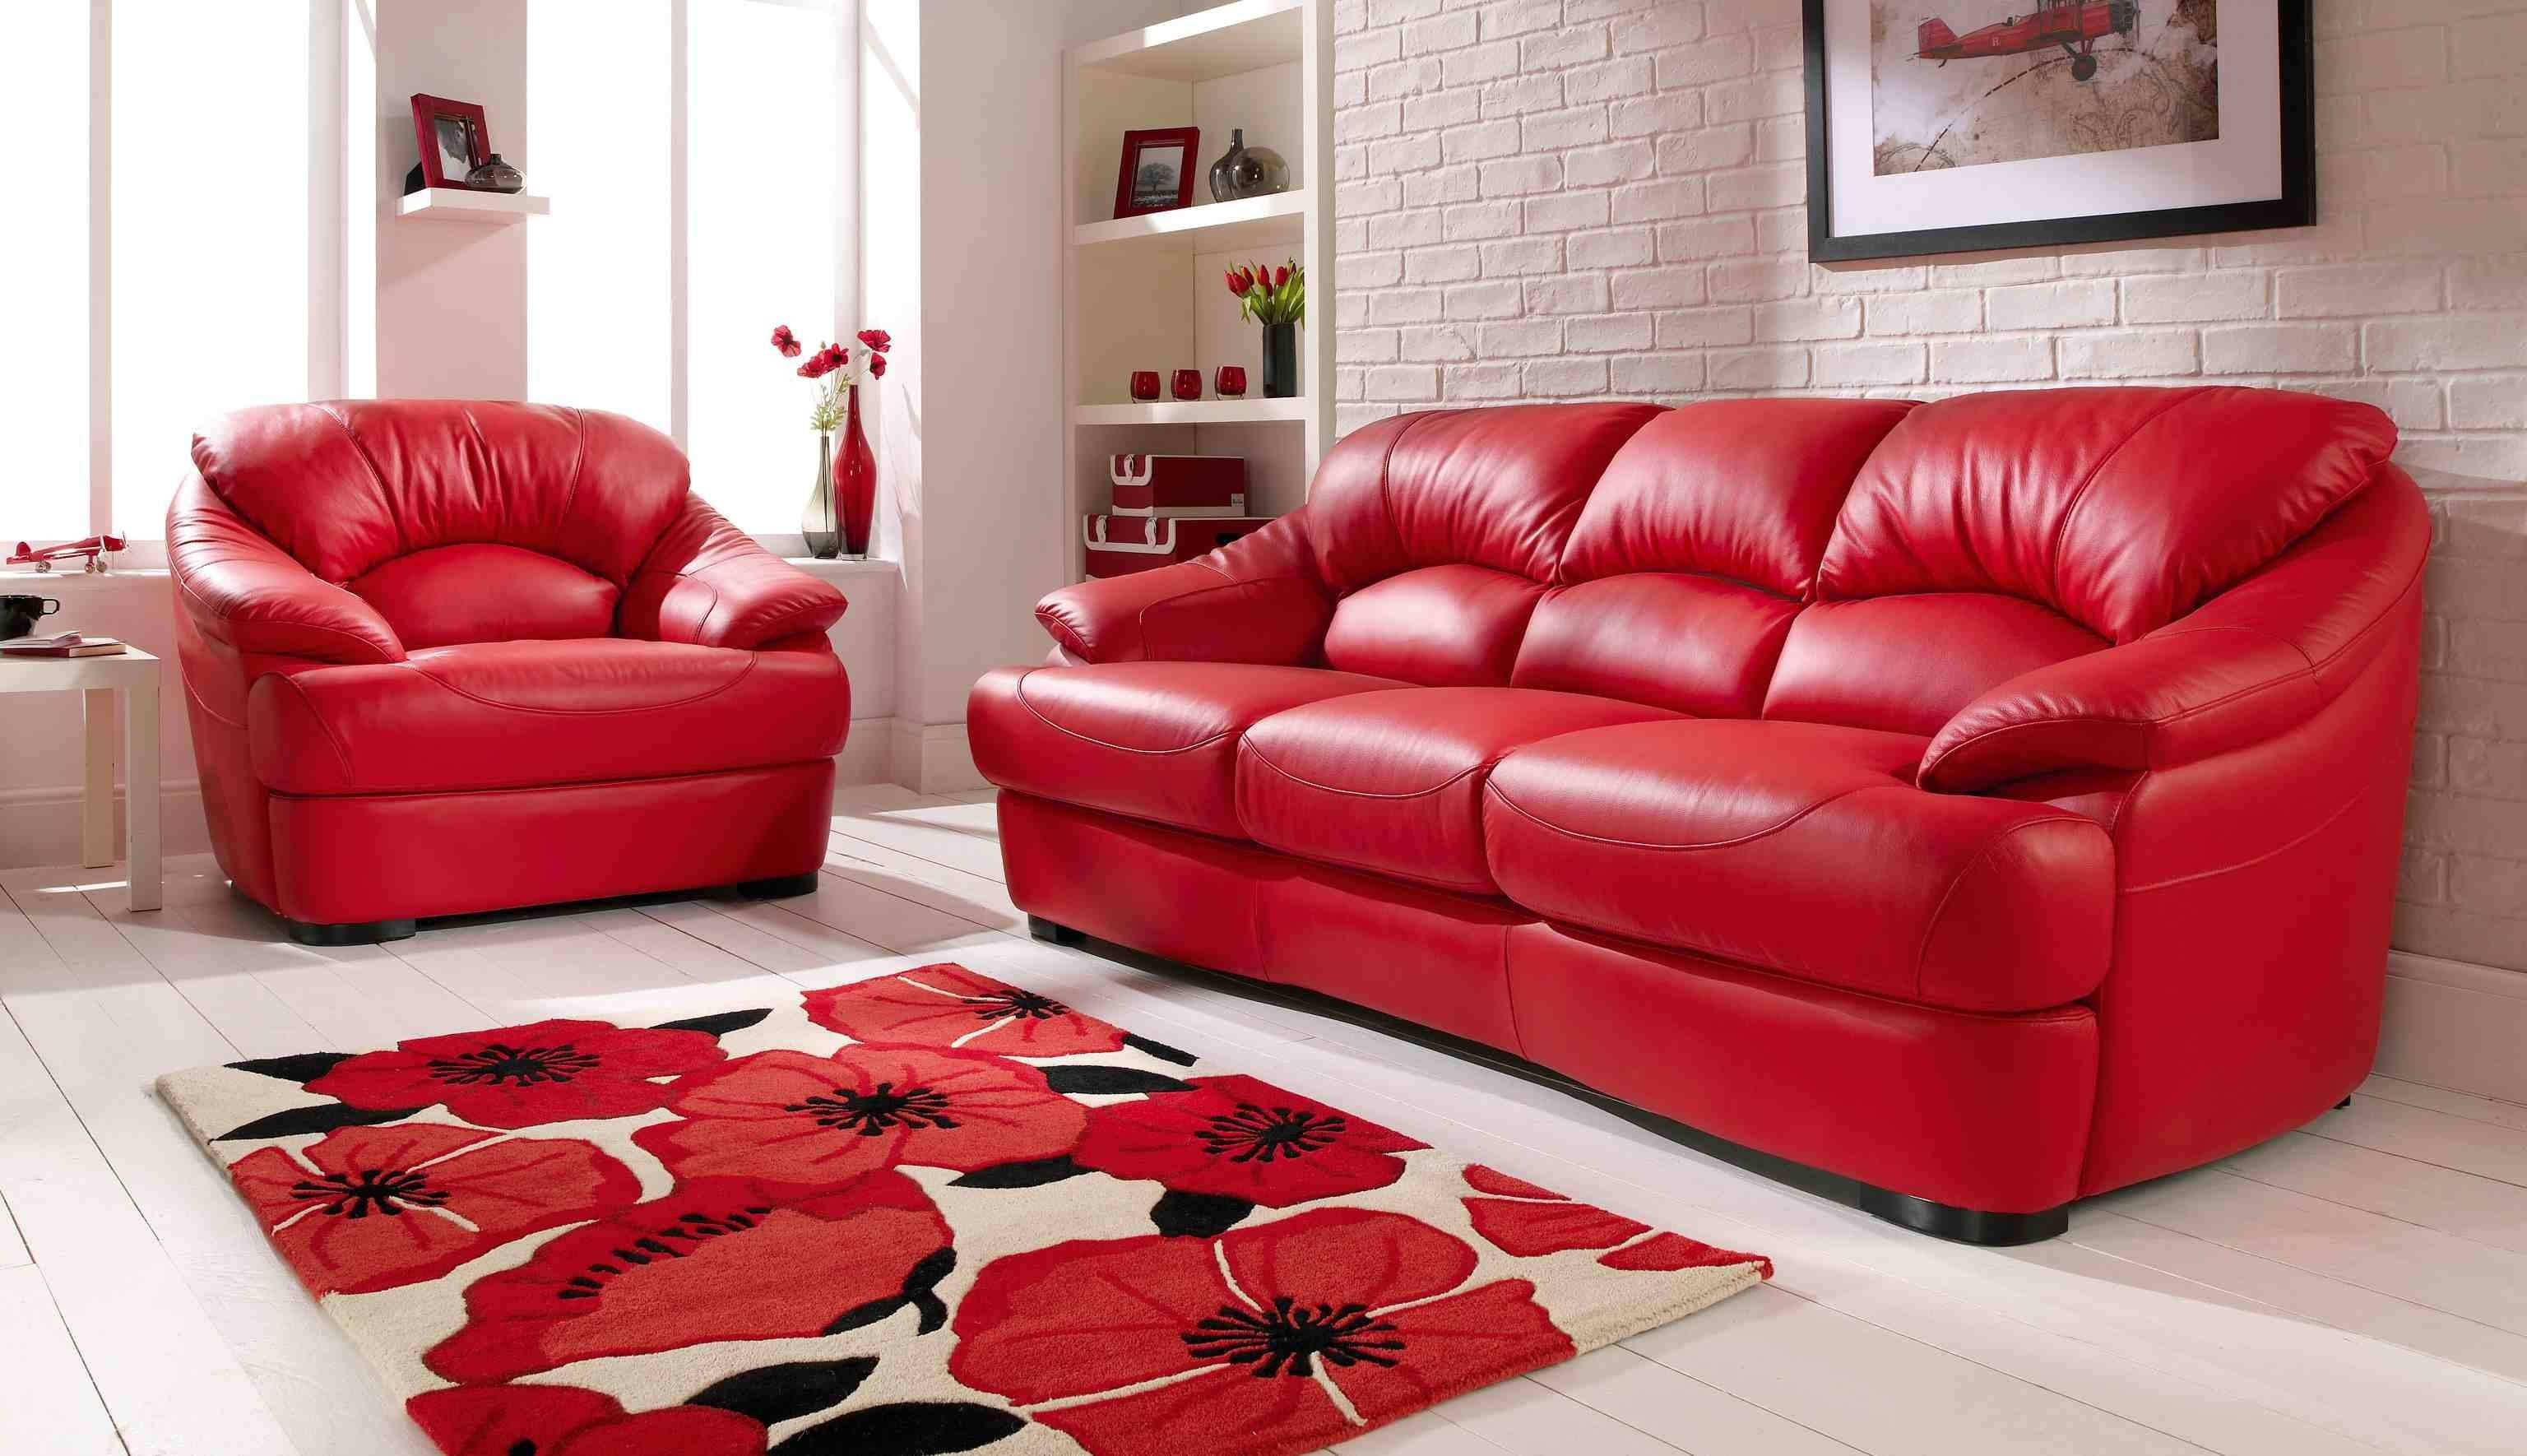 Red Sofas Leather | Tehranmix Decoration Throughout The Brick Leather Sofa (View 28 of 30)